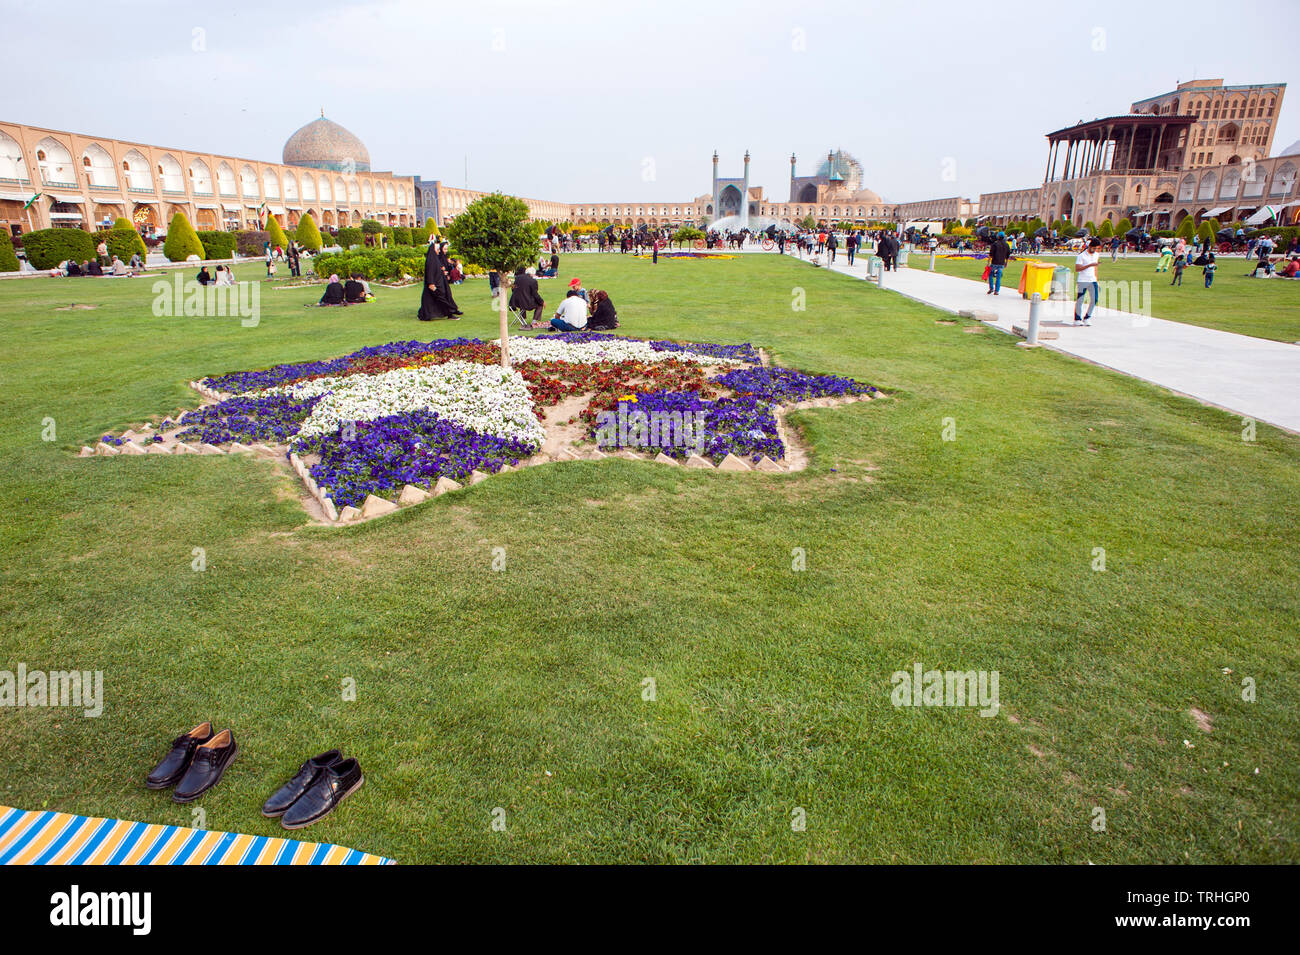 Picknickers relaxing at Maydan-e Imam Square, also known as Naqsh-e Jahan Square, in Esfahan, Iran. It is a UNESCO World Heritage Site. Stock Photo